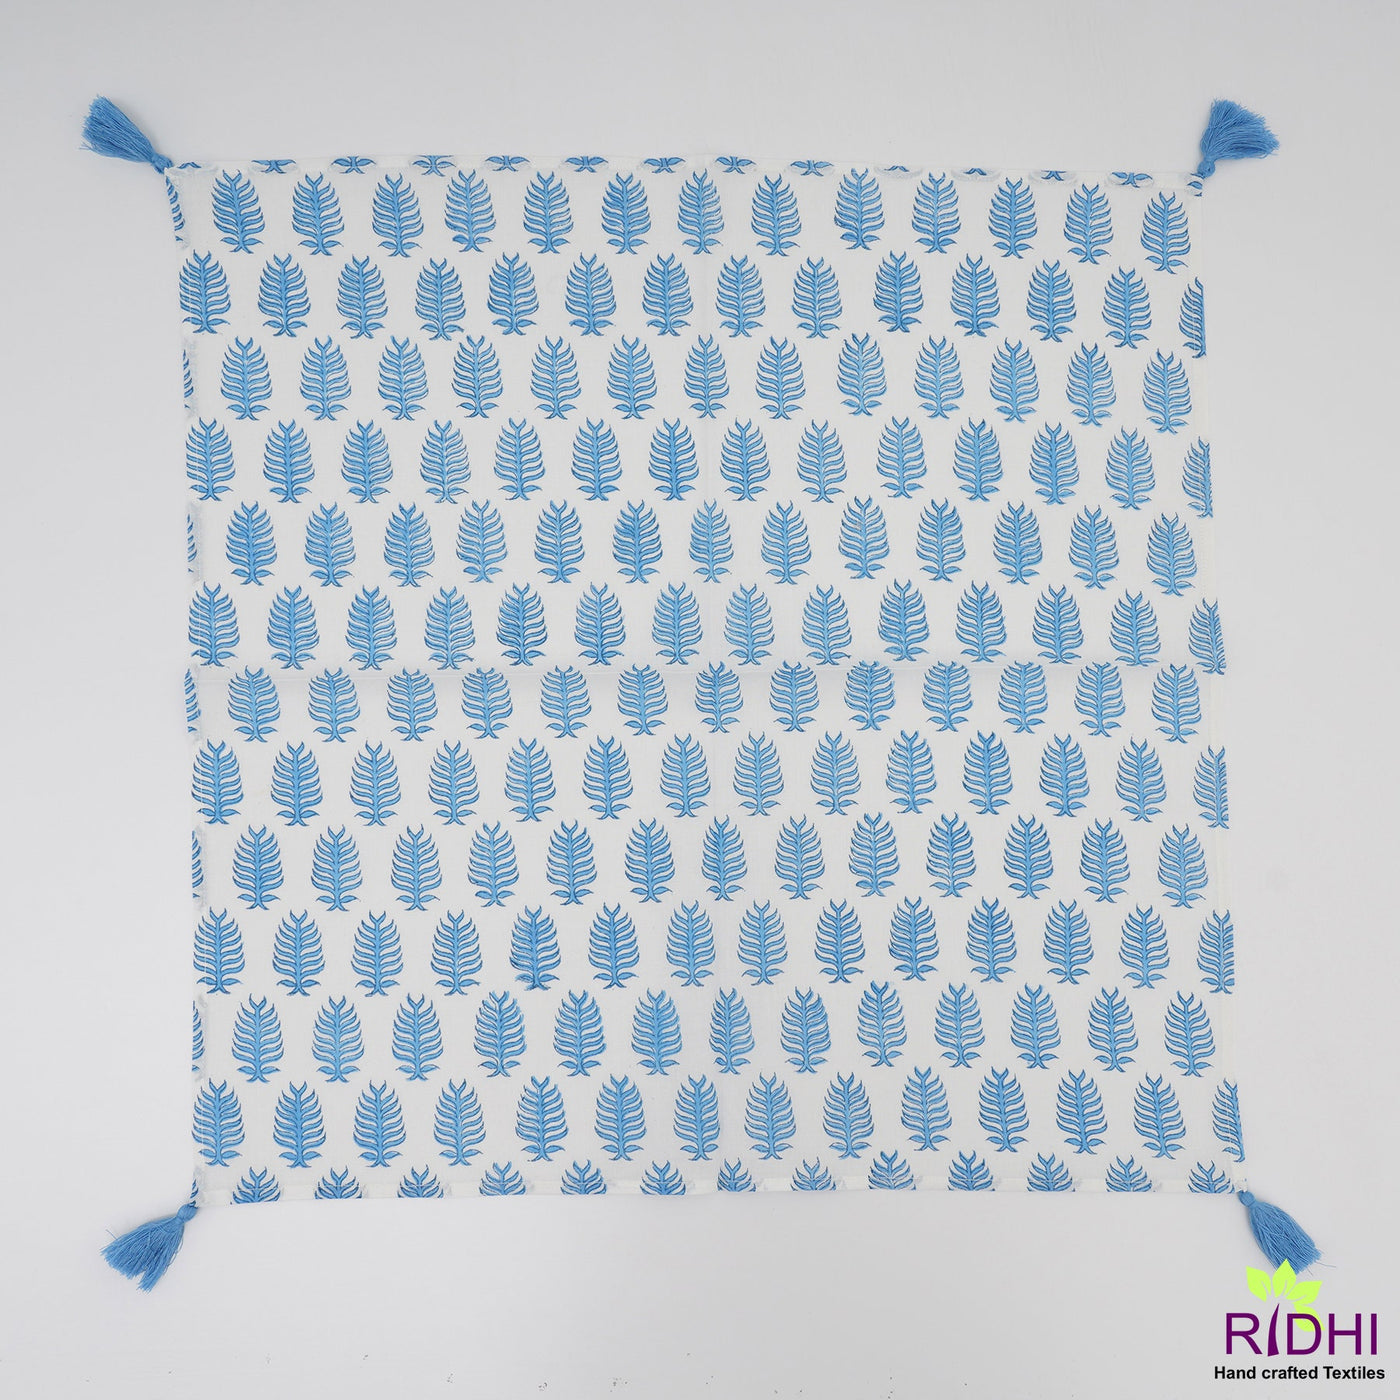 Cerulean Blue Leaf Printed Indian Hand Block Printed Cotton Cloth Soft Napkins, Wedding Home Event Party Gift, 9X9"- Cocktail 20X20"- Dinner